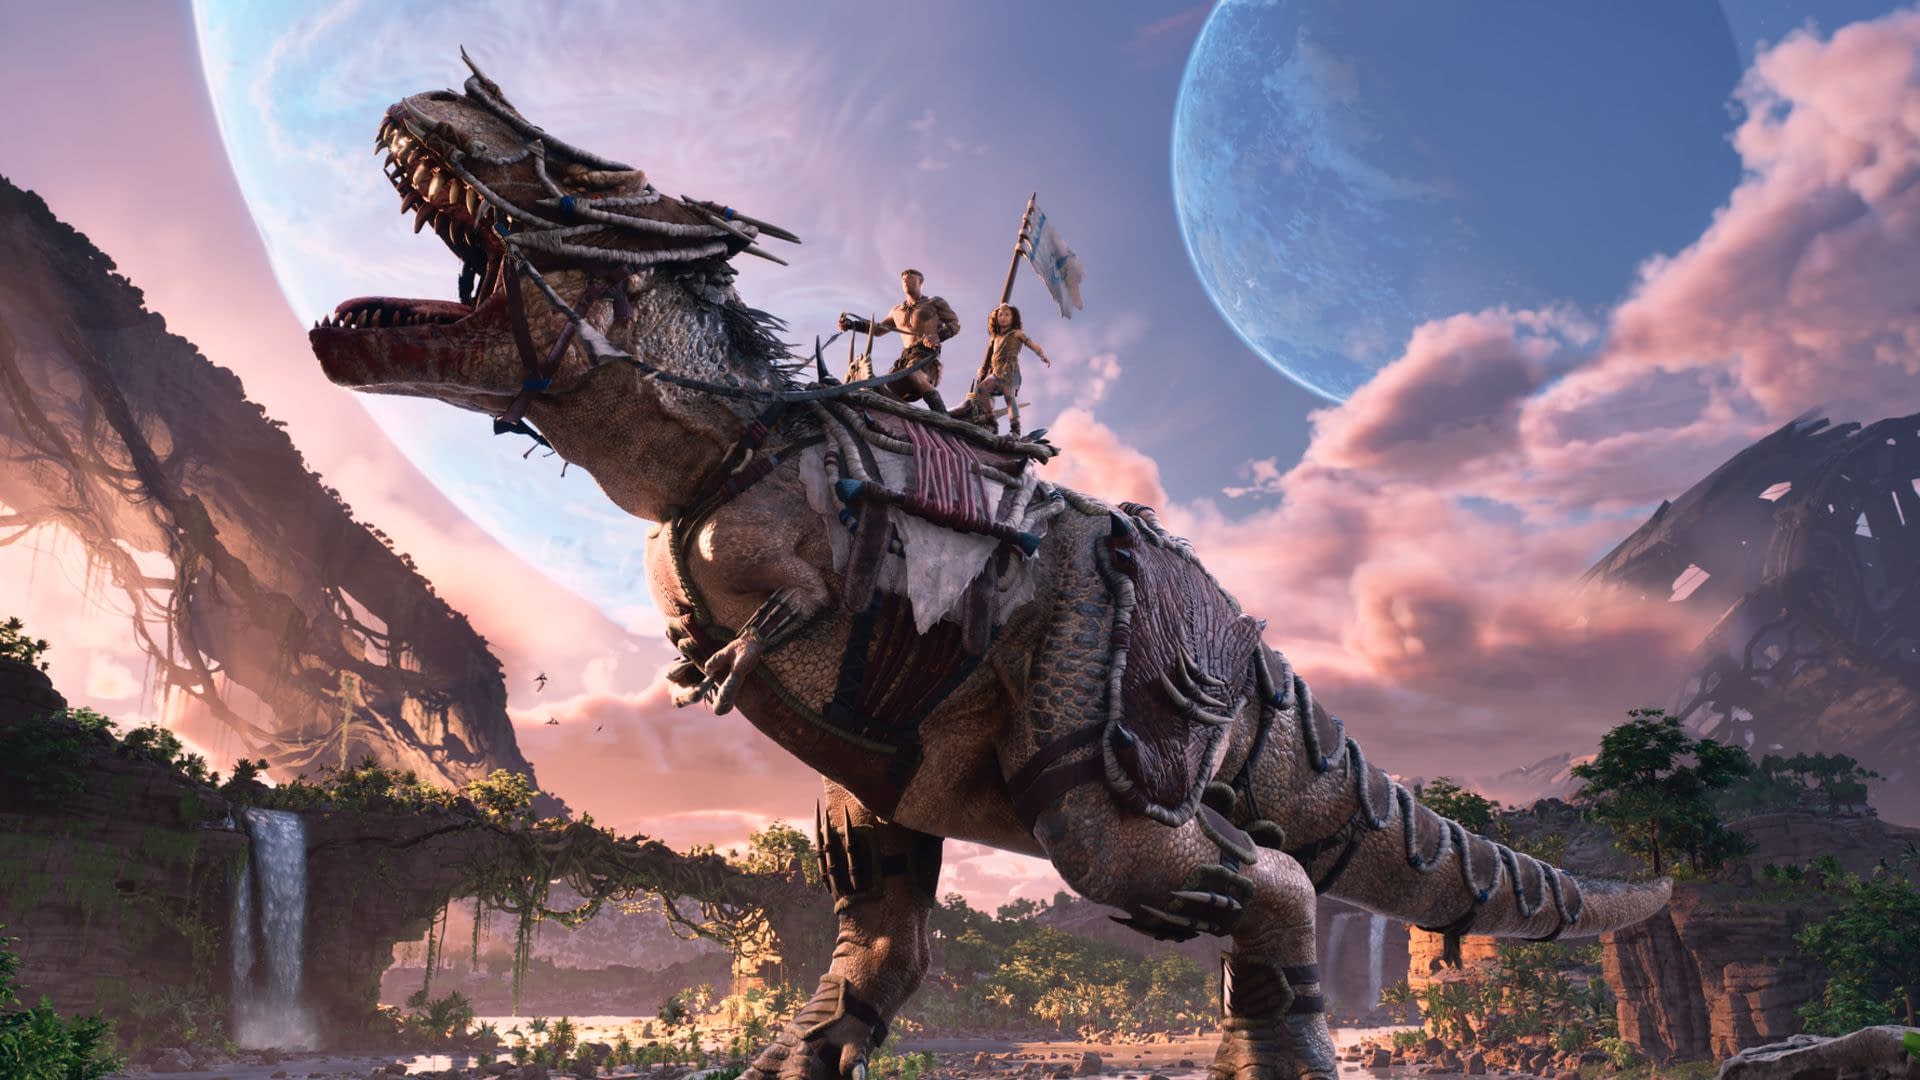 It Has Been Reported That Ark II Will Stay In Game Pass For 3 Years After Its Release